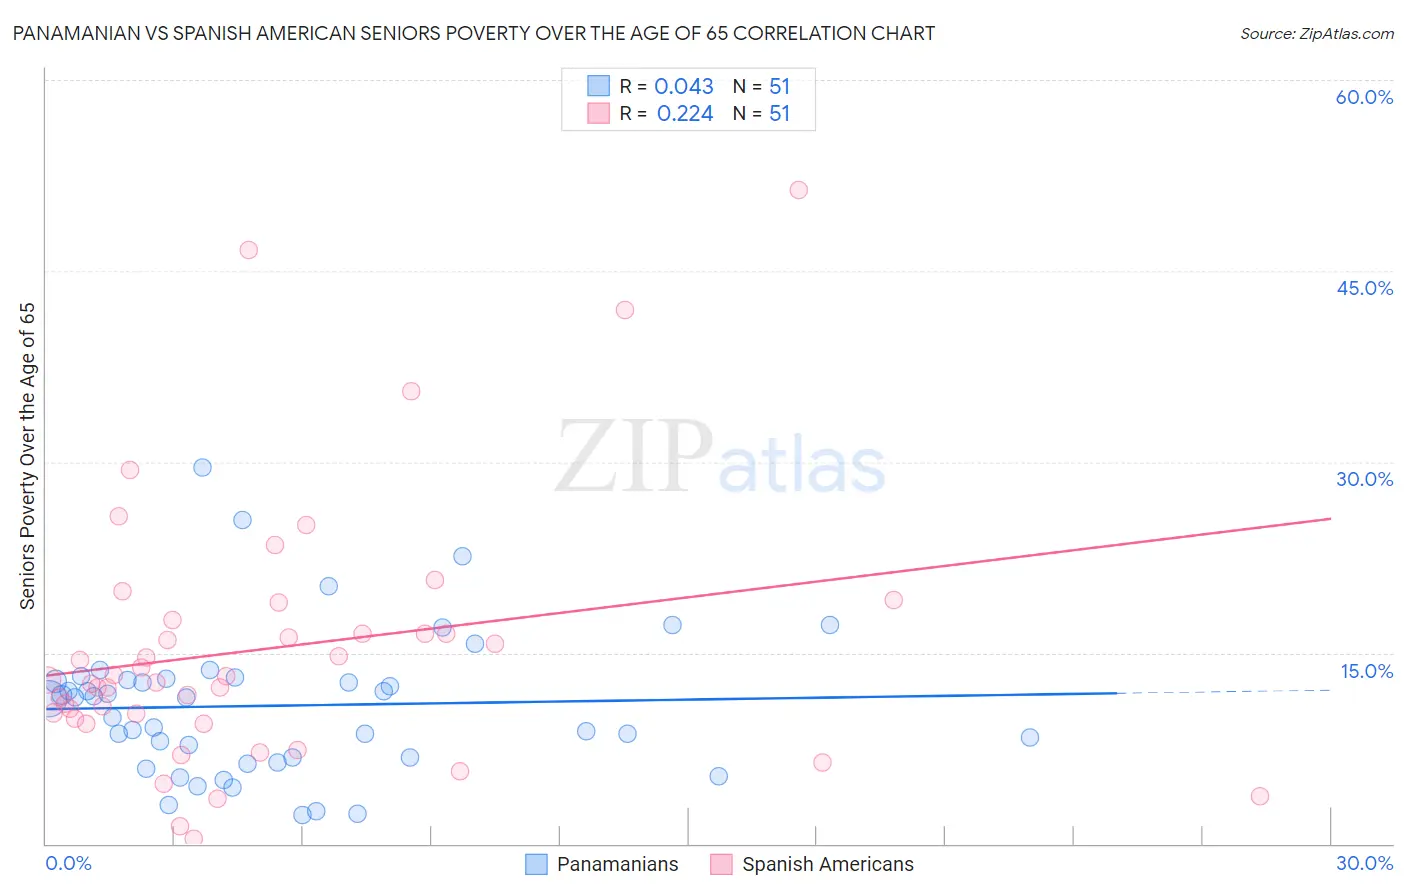 Panamanian vs Spanish American Seniors Poverty Over the Age of 65